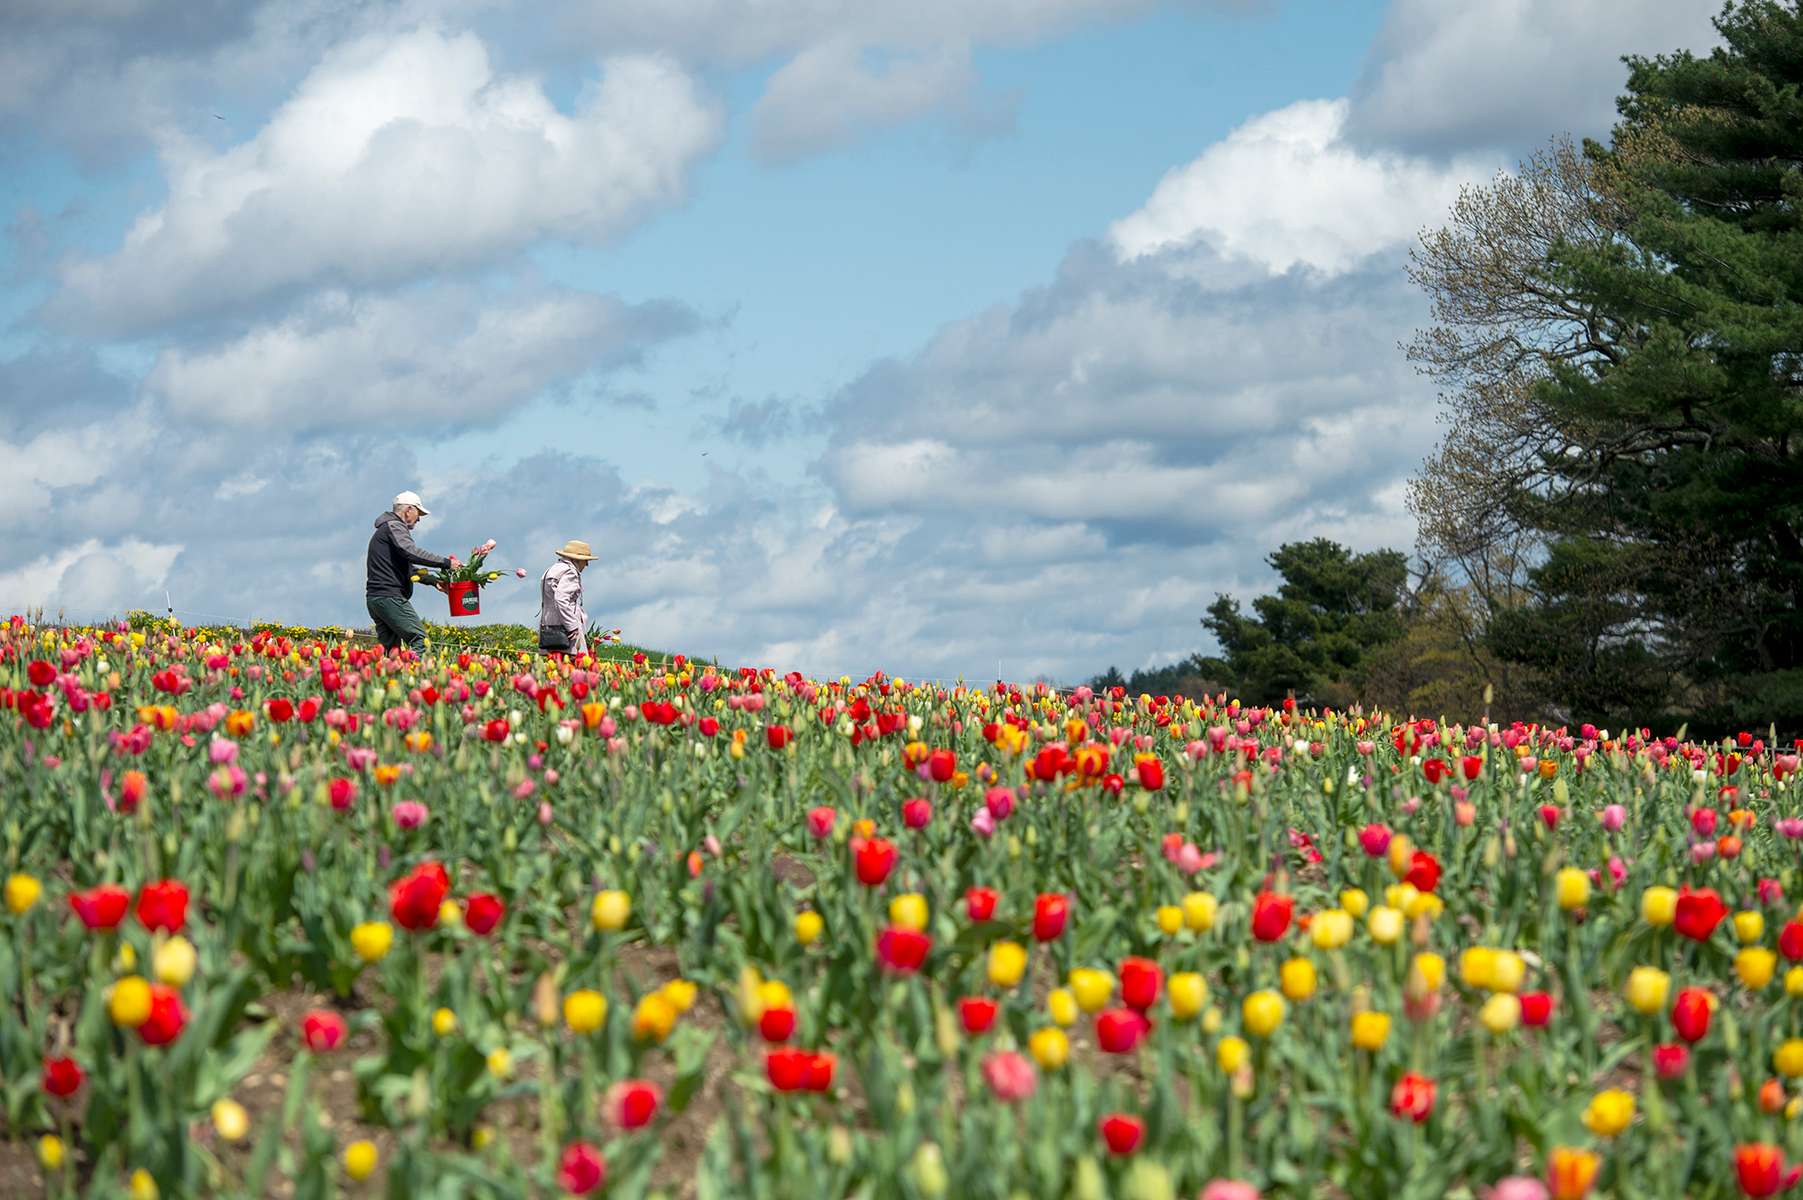 Katy Kleitz, of Stow, and her brother Tony Kleitz, visiting from Paris, pick tulips in a field of 200,000 tulips at Ferjulian's Farm in Hudson, April 24, 2023.